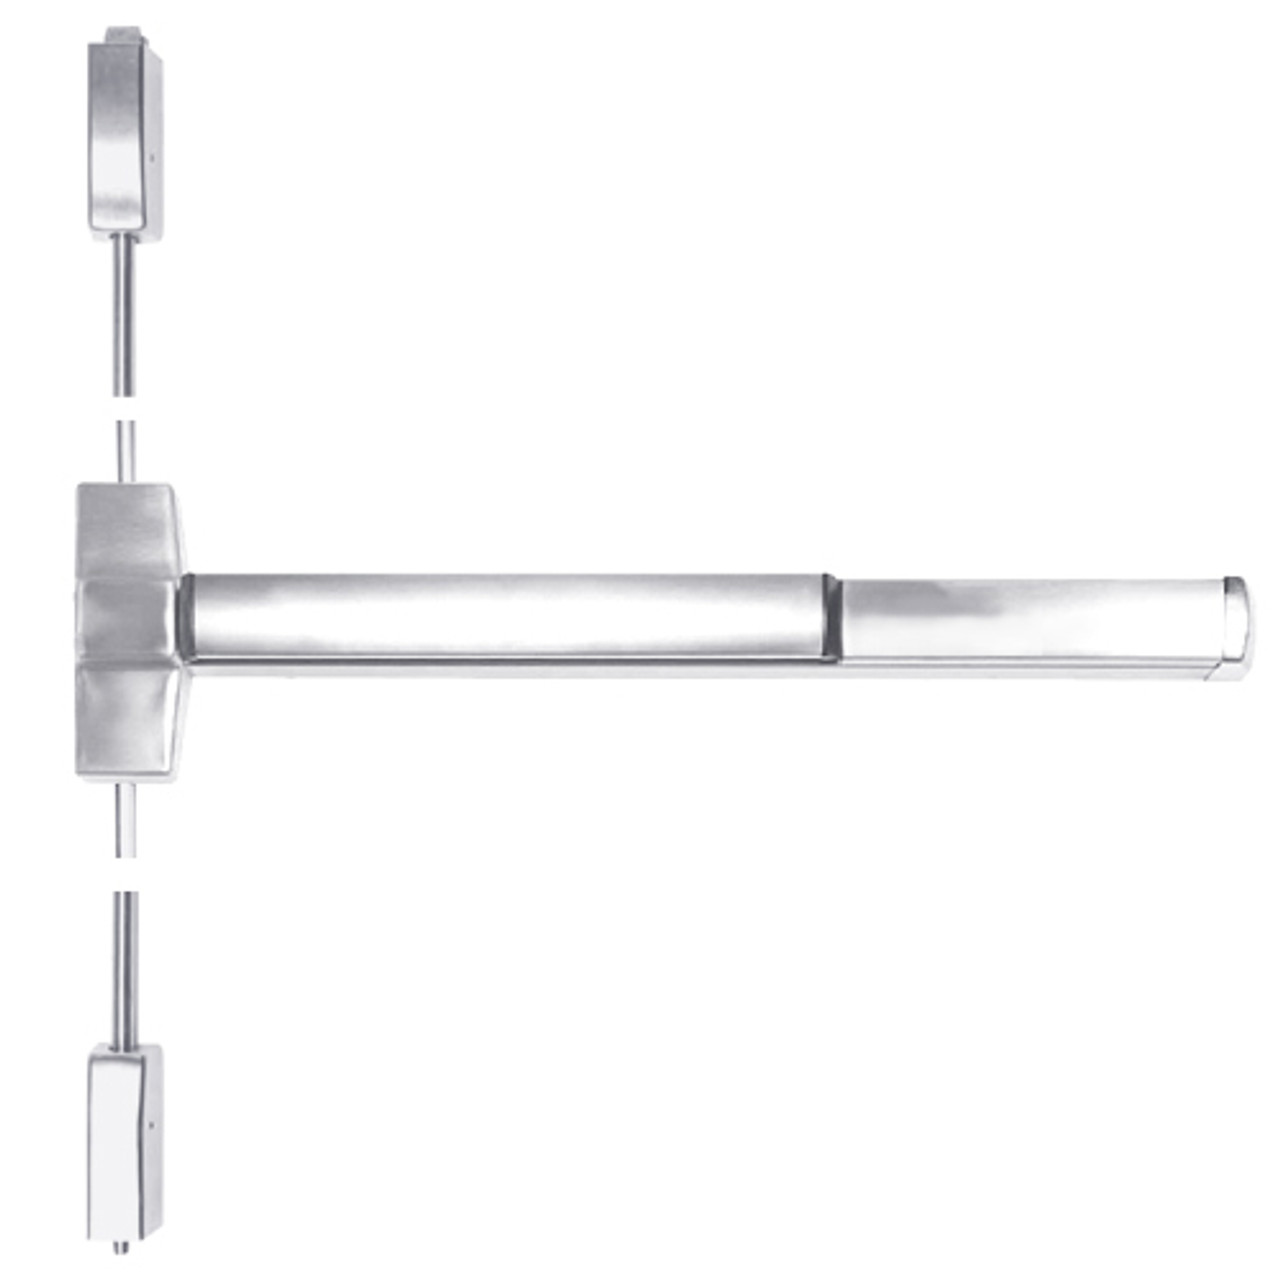 ED5400A-625-W048 Corbin ED5400 Series Fire Rated Vertical Rod Exit Device in Bright Chrome Finish